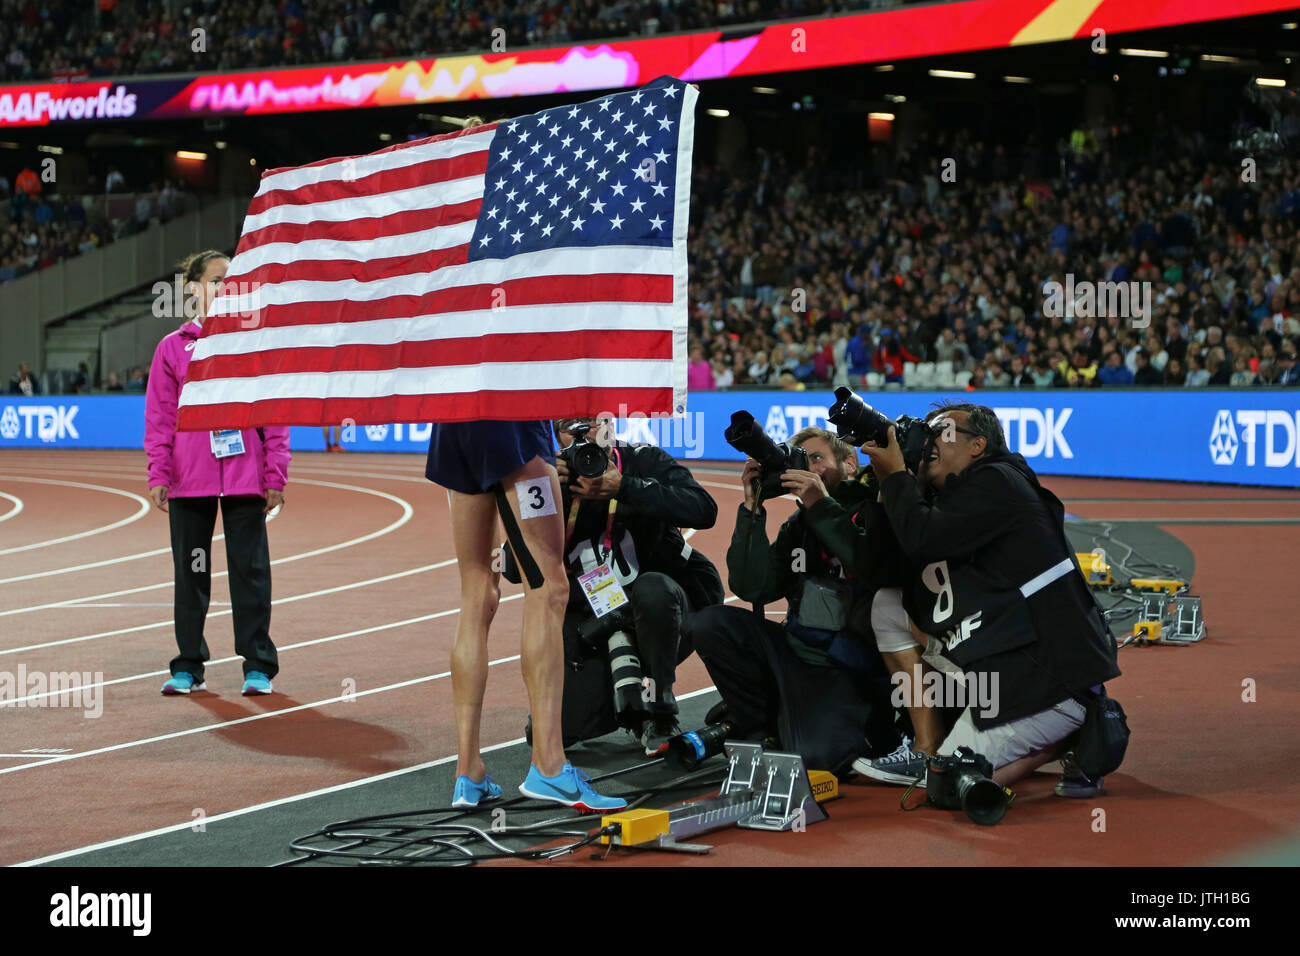 London, UK. 08-Aug-17.  Evan JAGER representing United States of America celebrating third place after the Men's 3000m Steeplechase Final at the 2017, IAAF World Championships, Queen Elizabeth Olympic Park, Stratford, London, UK. Credit: Simon Balson/Alamy Live News Stock Photo